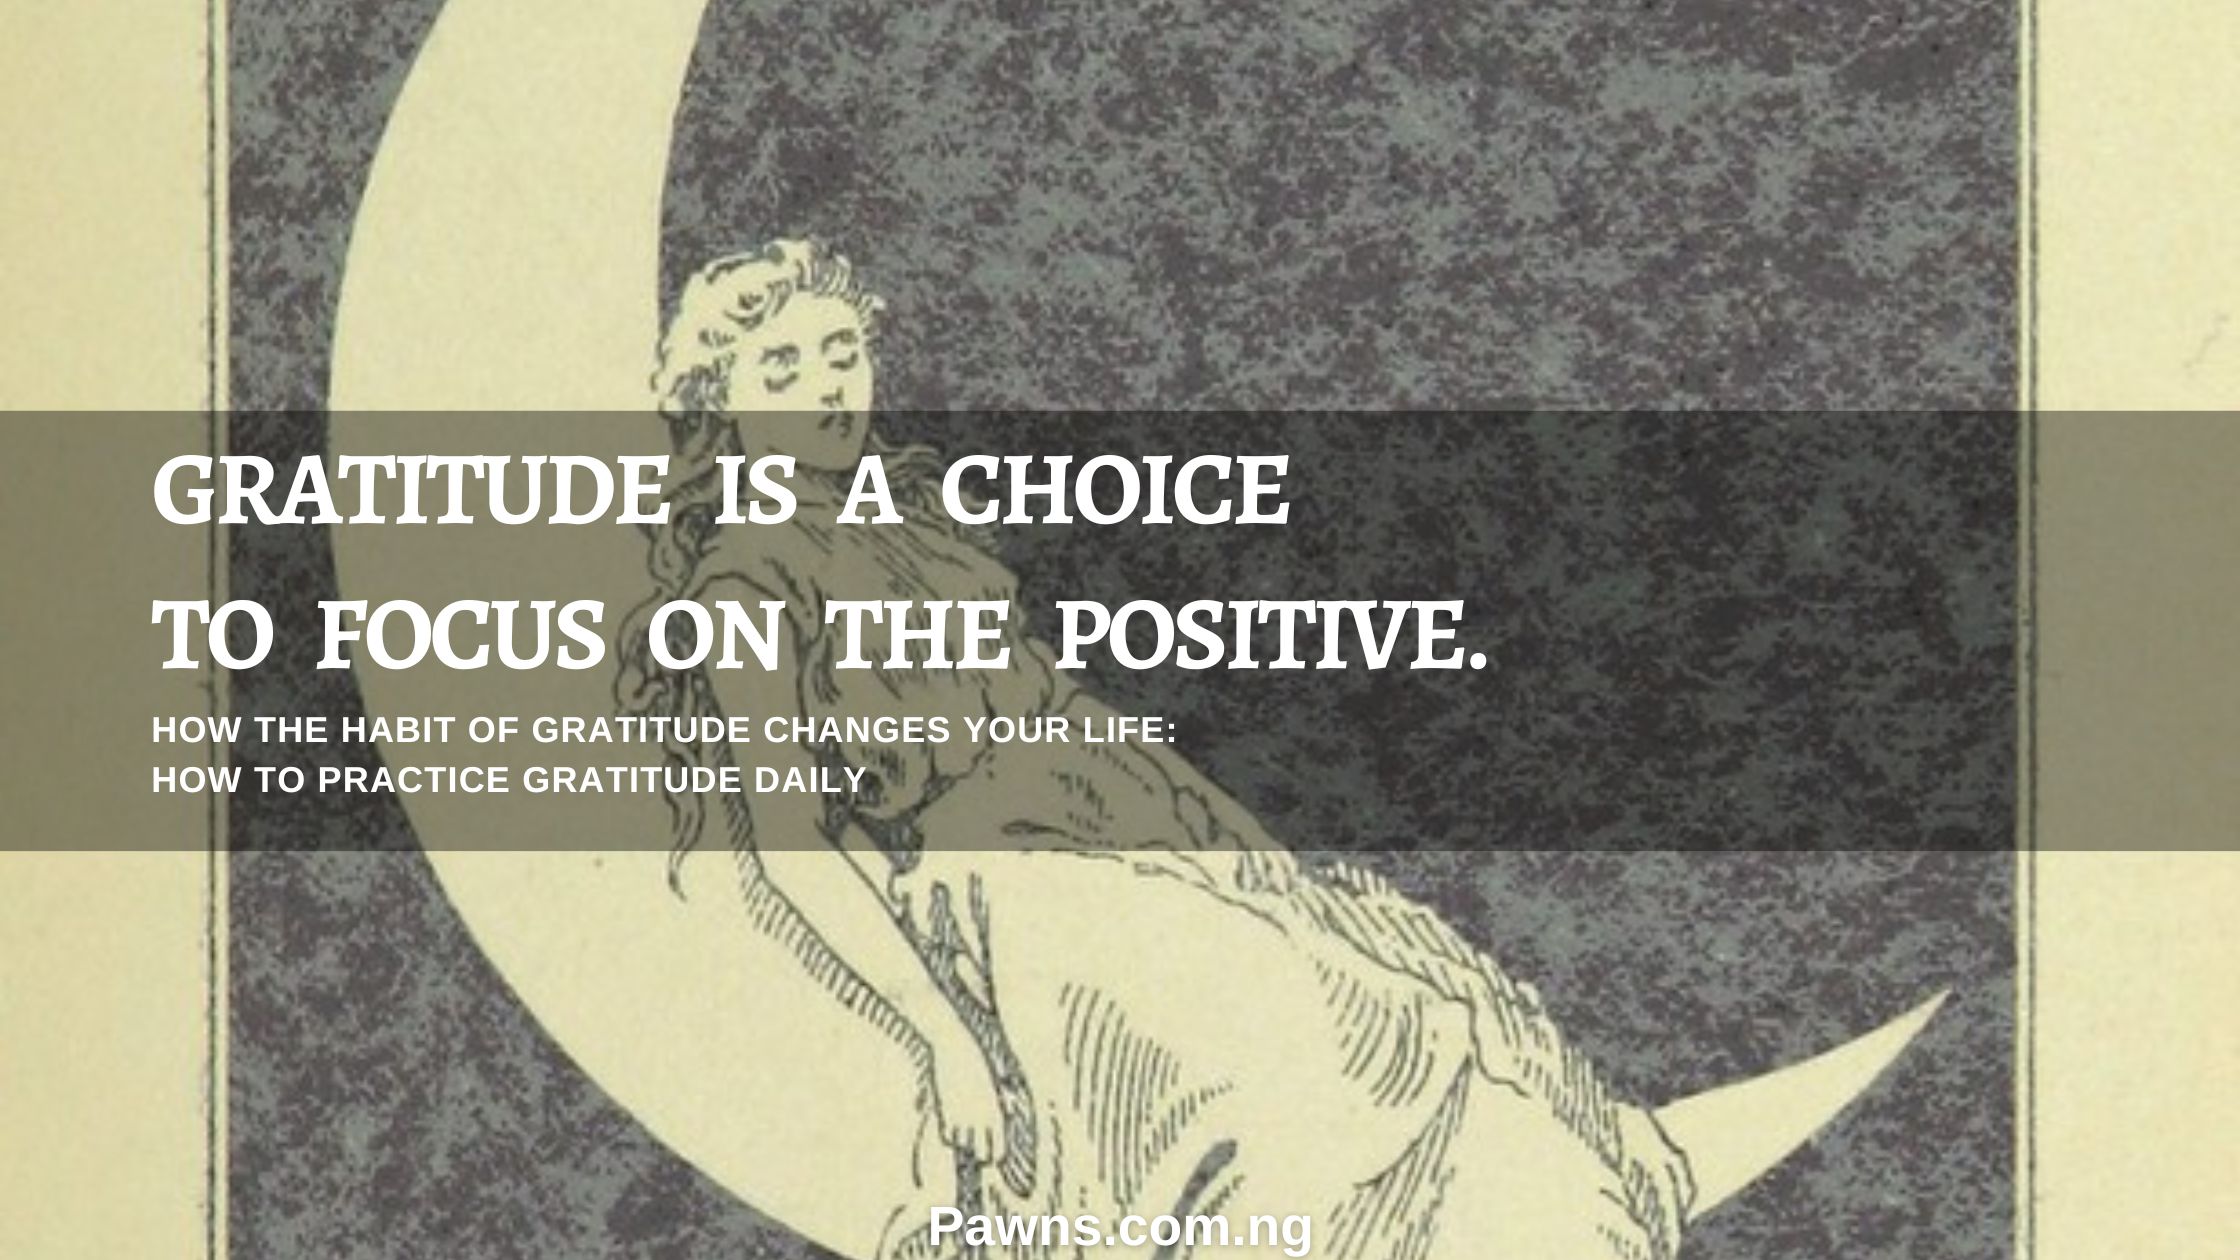 GRATITUDE IS A CHOICE TO FOCUS ON THE POSITIVE HOW THE HABIT OF GRATITUDE CHANGES YOUR LIFE HOW TO PRACTICE GRATITUDE DAILY